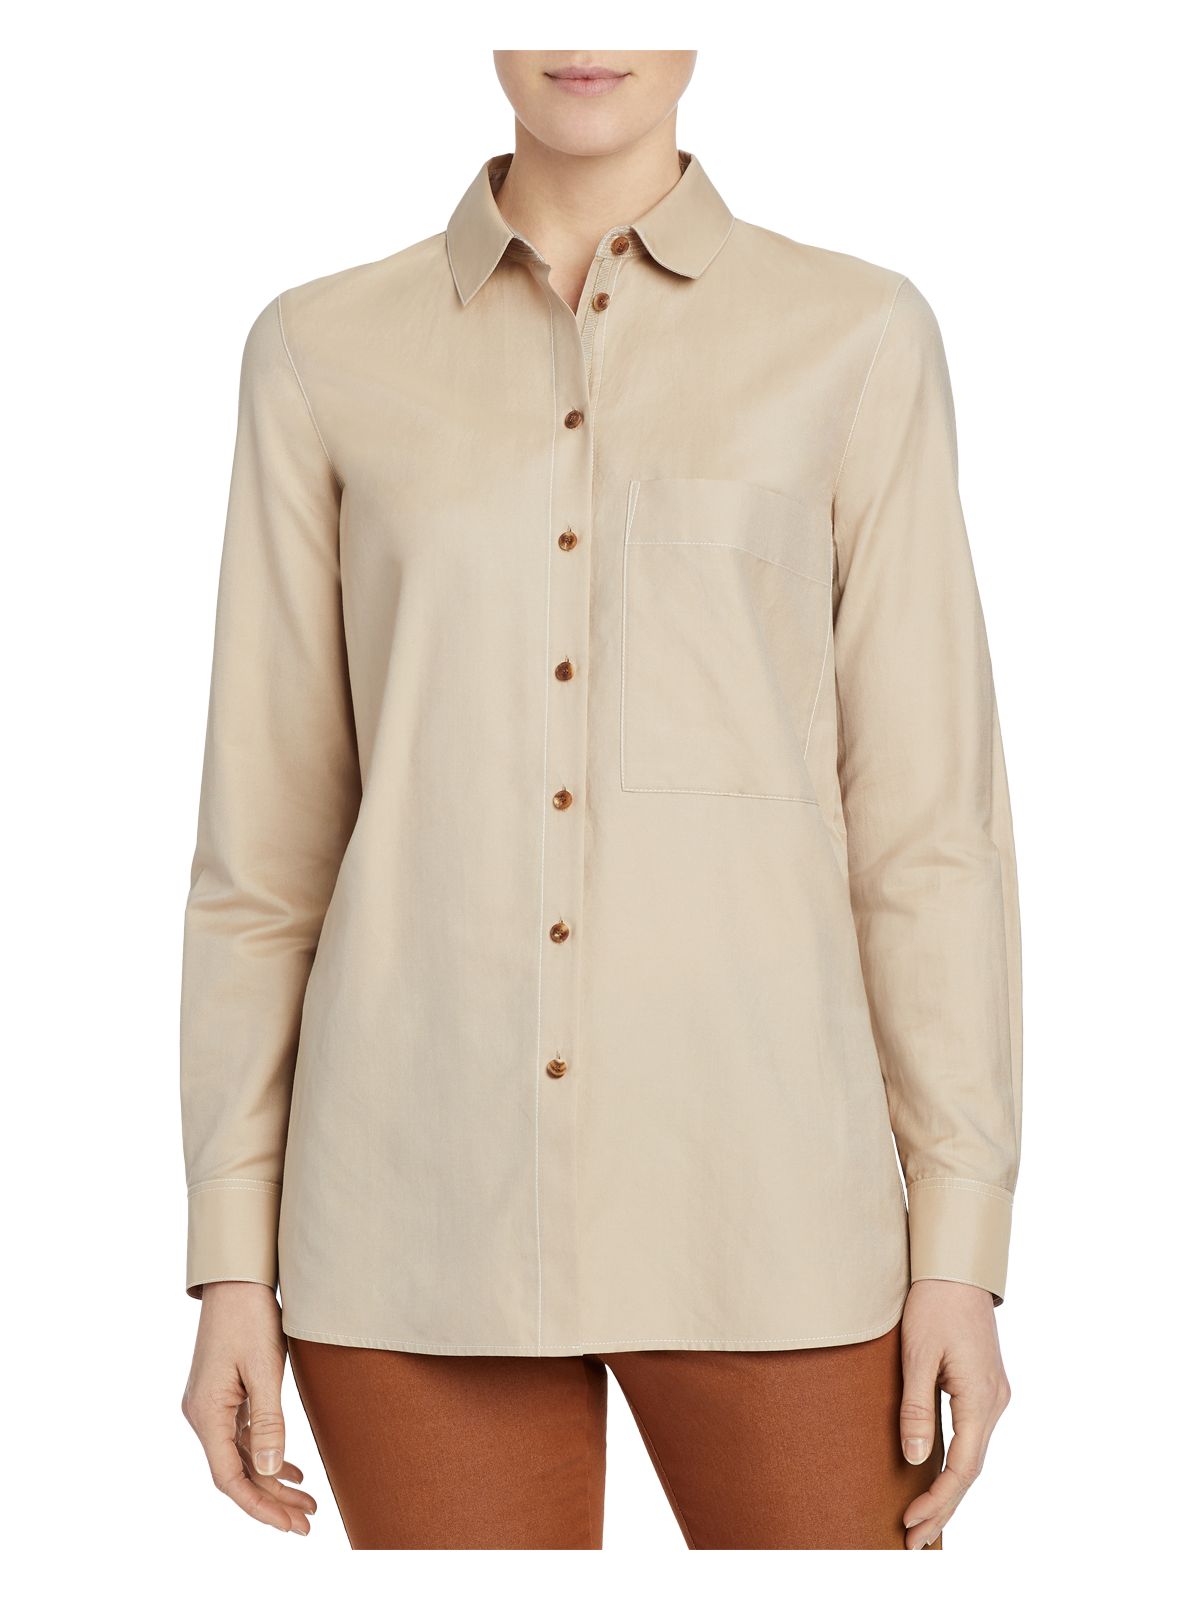 LAFAYETTE 148 Womens Beige Pocketed Vented Hem Cuffed Sleeve Collared Wear To Work Button Up Top M